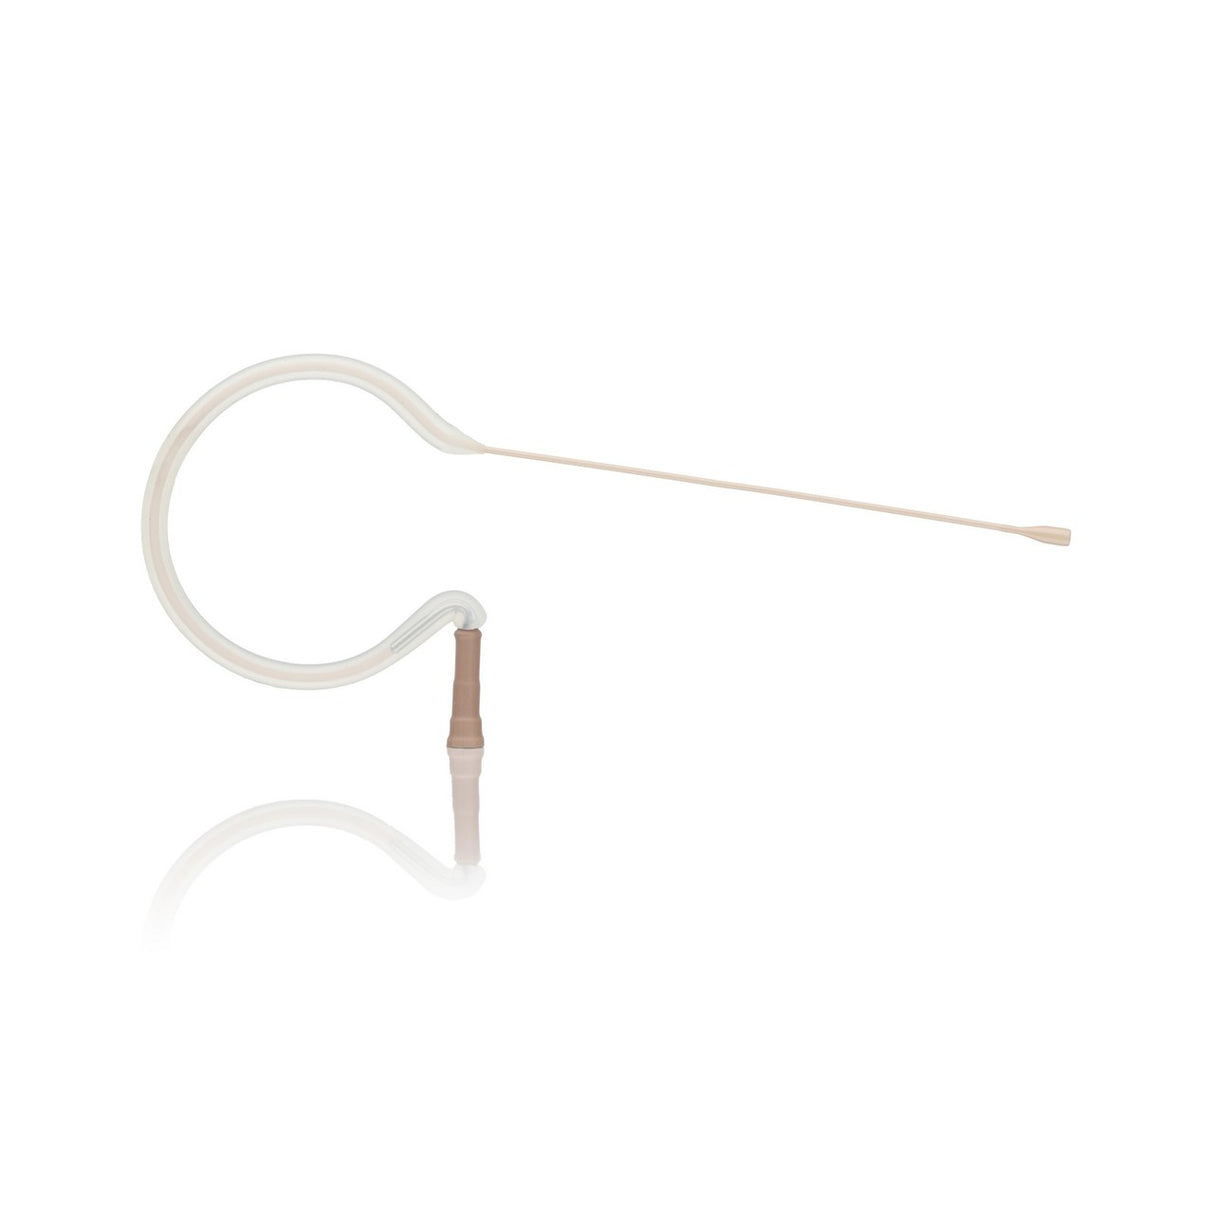 Countryman E6IOW6L1SL | Flxible Omnidirectional Earset Microphone with Shure TA4F Connector Light Beige